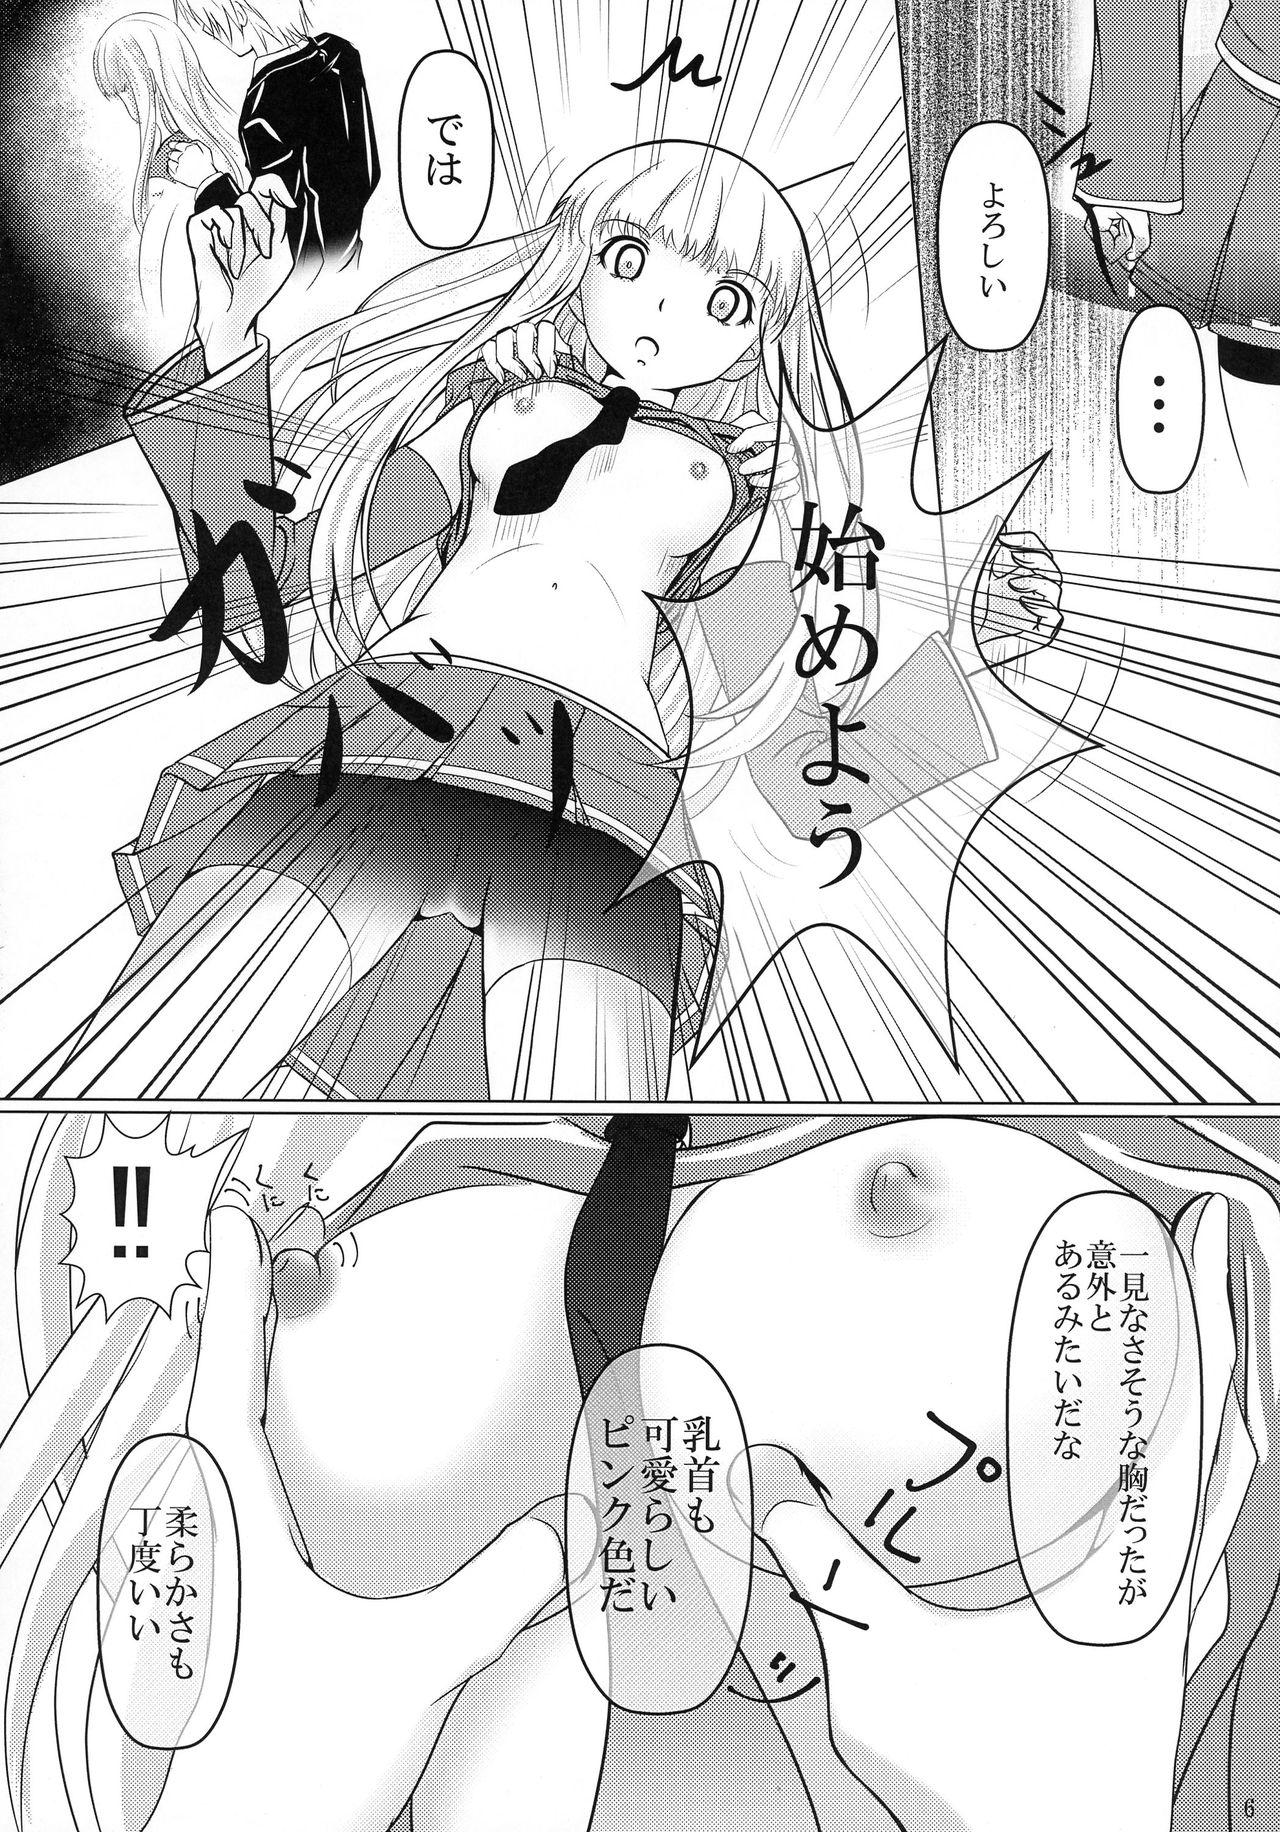 Daddy CONFIDENTIAL - Arpeggio of blue steel Hairy - Page 6